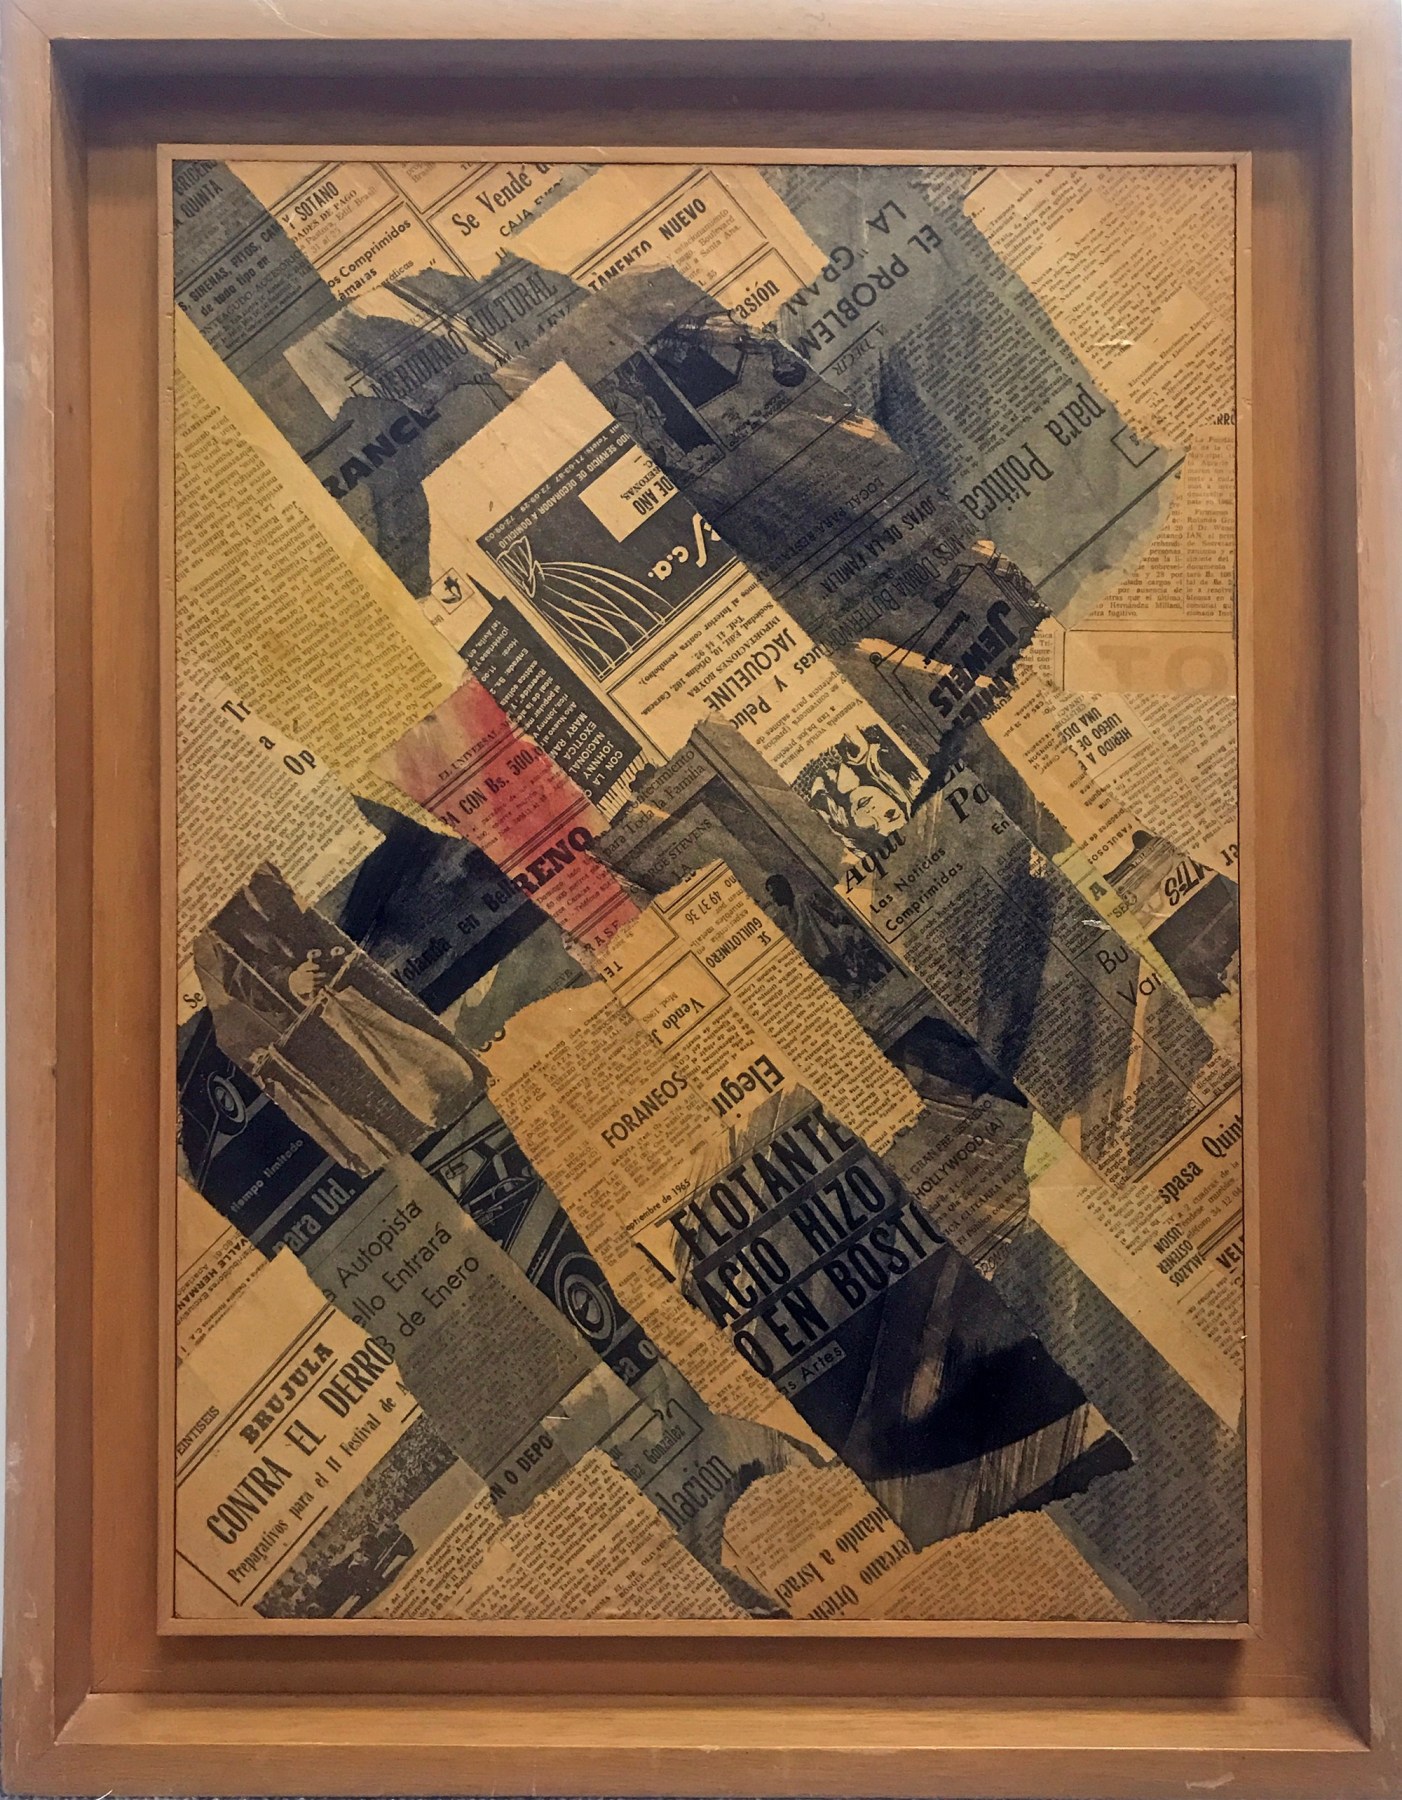 Alejandro Otero, Untitled, c. 1960,&nbsp;Glued papers on wood,&nbsp;25 15/16 x 21 5/8 in. (66 x 55 cm.)